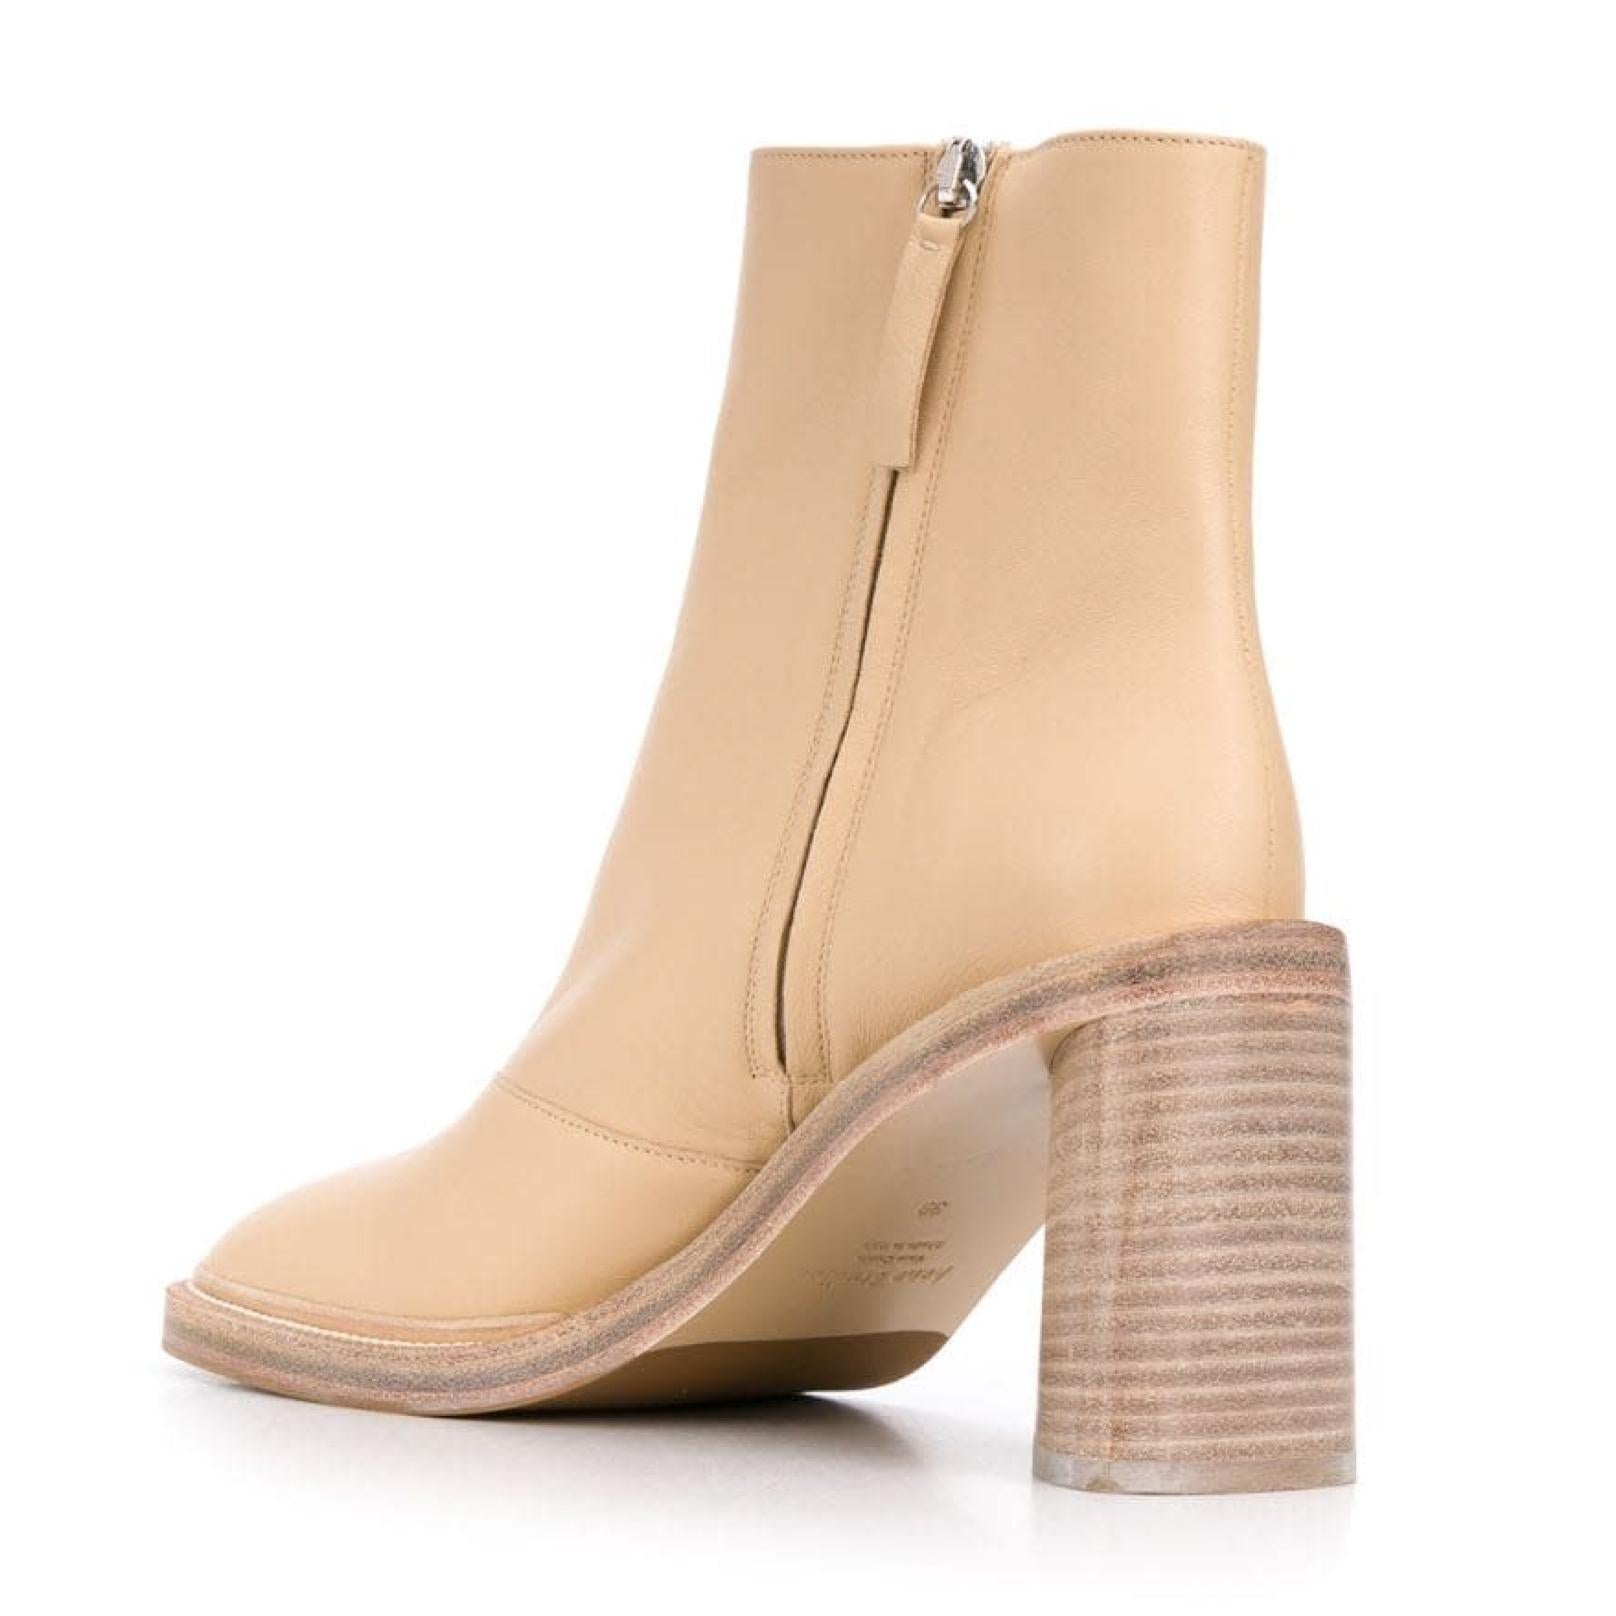 Acne Studios Beige Leather Block Heel Boots (37 EU) In New Condition For Sale In Montreal, Quebec